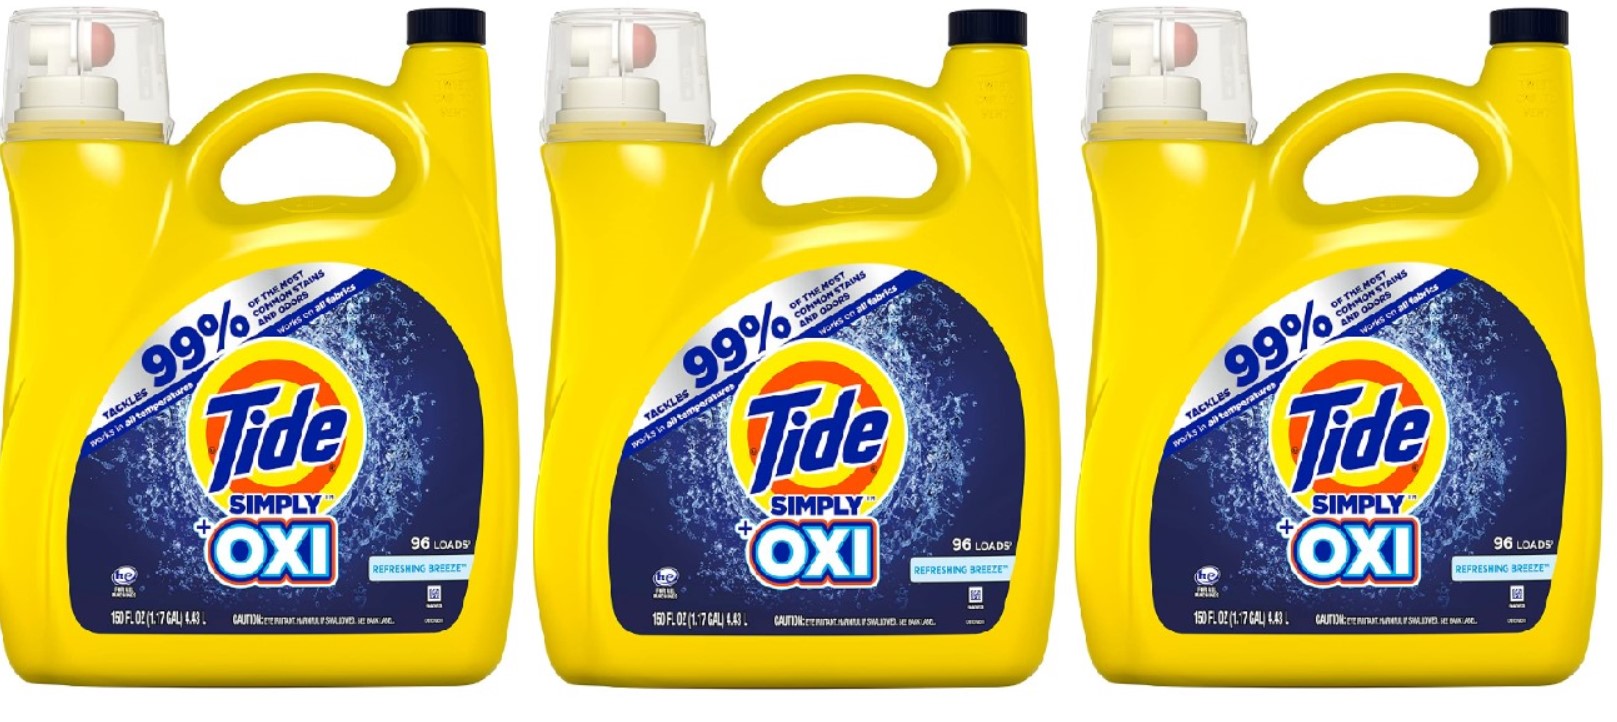 150-fl-oz Tide Simply + Oxi Liquid Laundry Detergent (Clean Breeze) 3 for $26.31 w/ S&S + Free Shipping